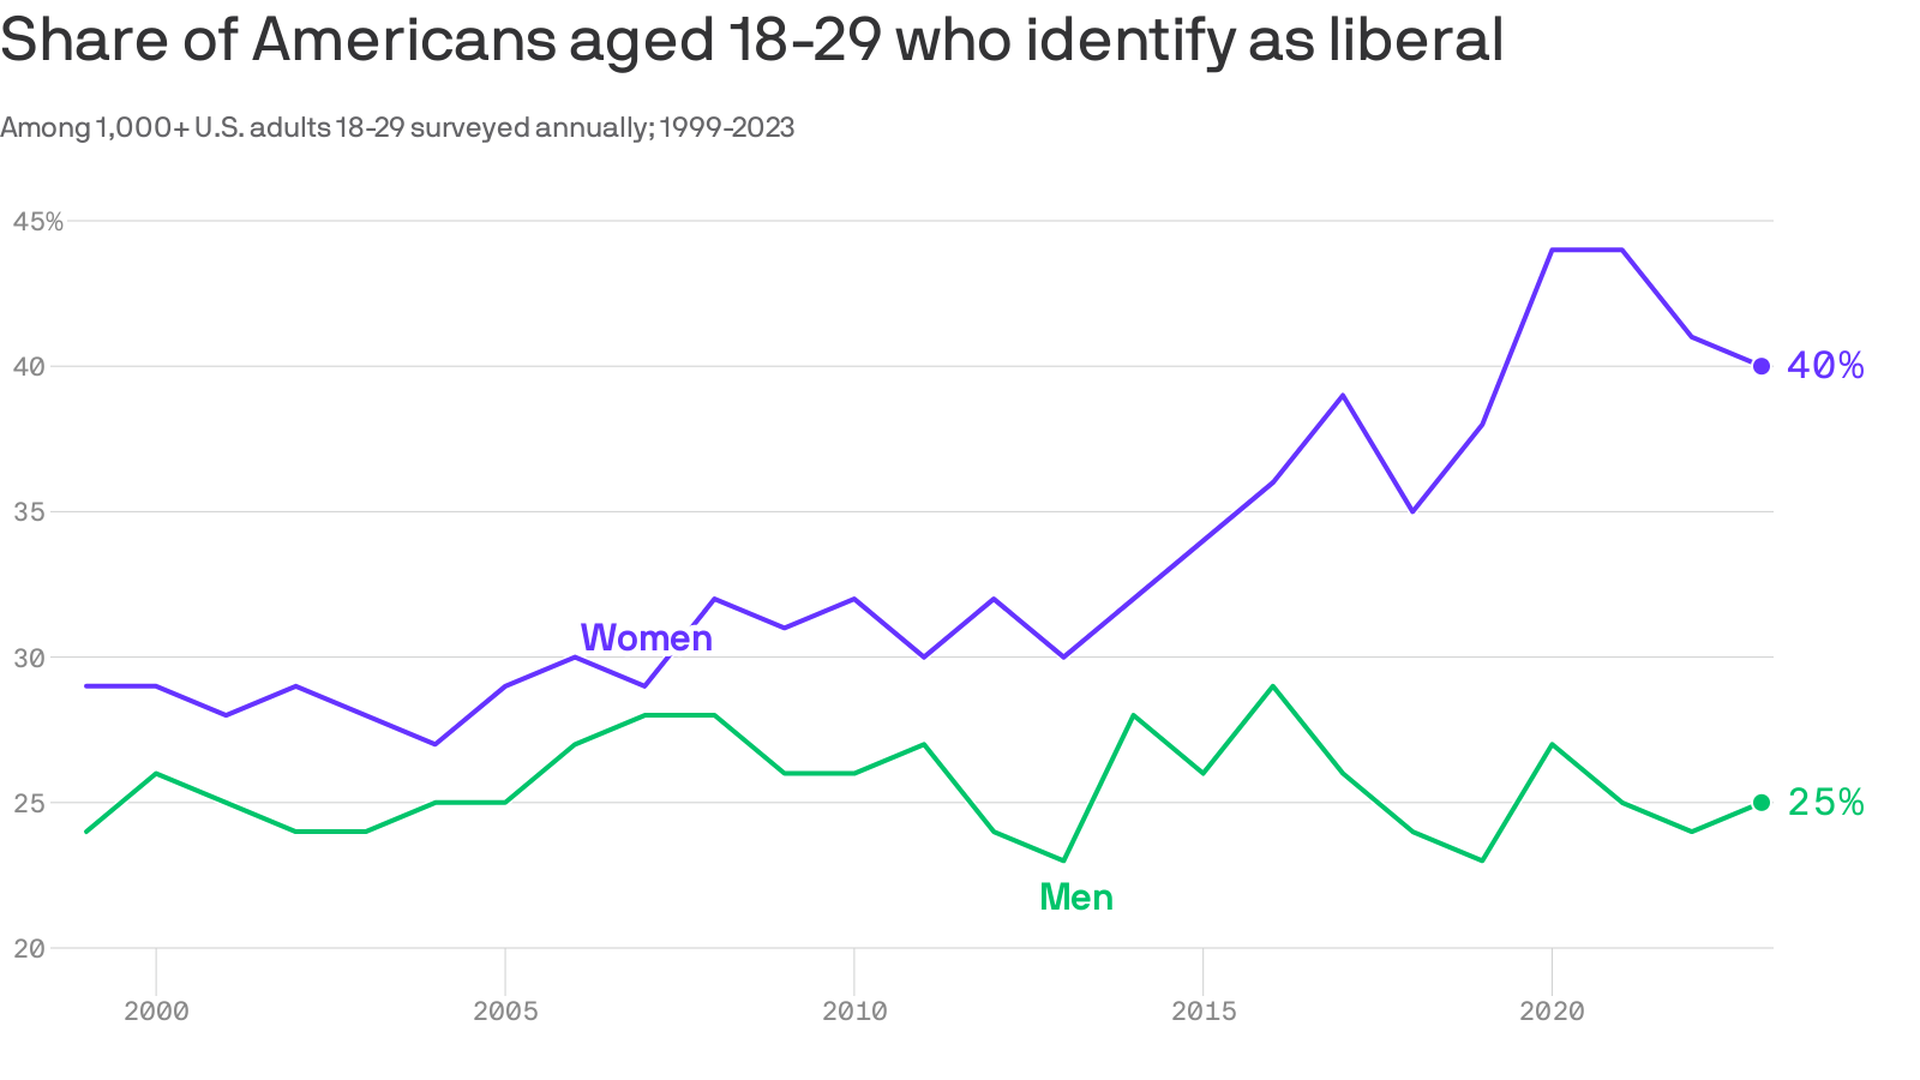 The line chart shows the percentage of American men and women aged 18-29 who identify as liberal from 1999 to 2023. The data reveals a general upward trend over the years, with women consistently identifying as liberal at a higher rate than men.